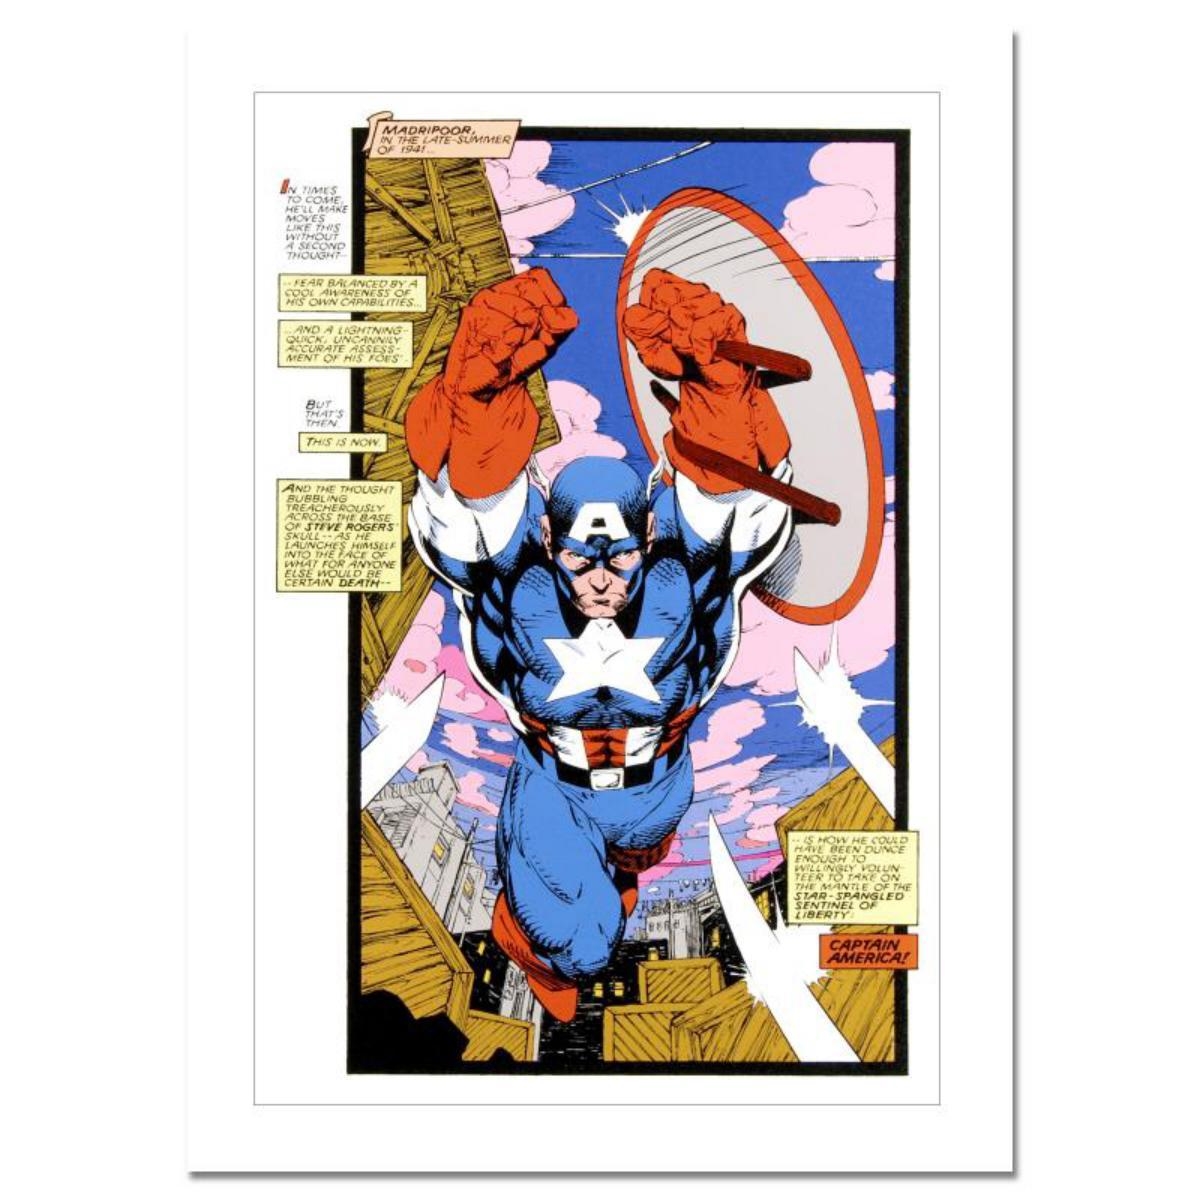 Artwork by Jim Lee, Captain America, Sentinel: Uncanny X-Men #268, Made of GICLEE